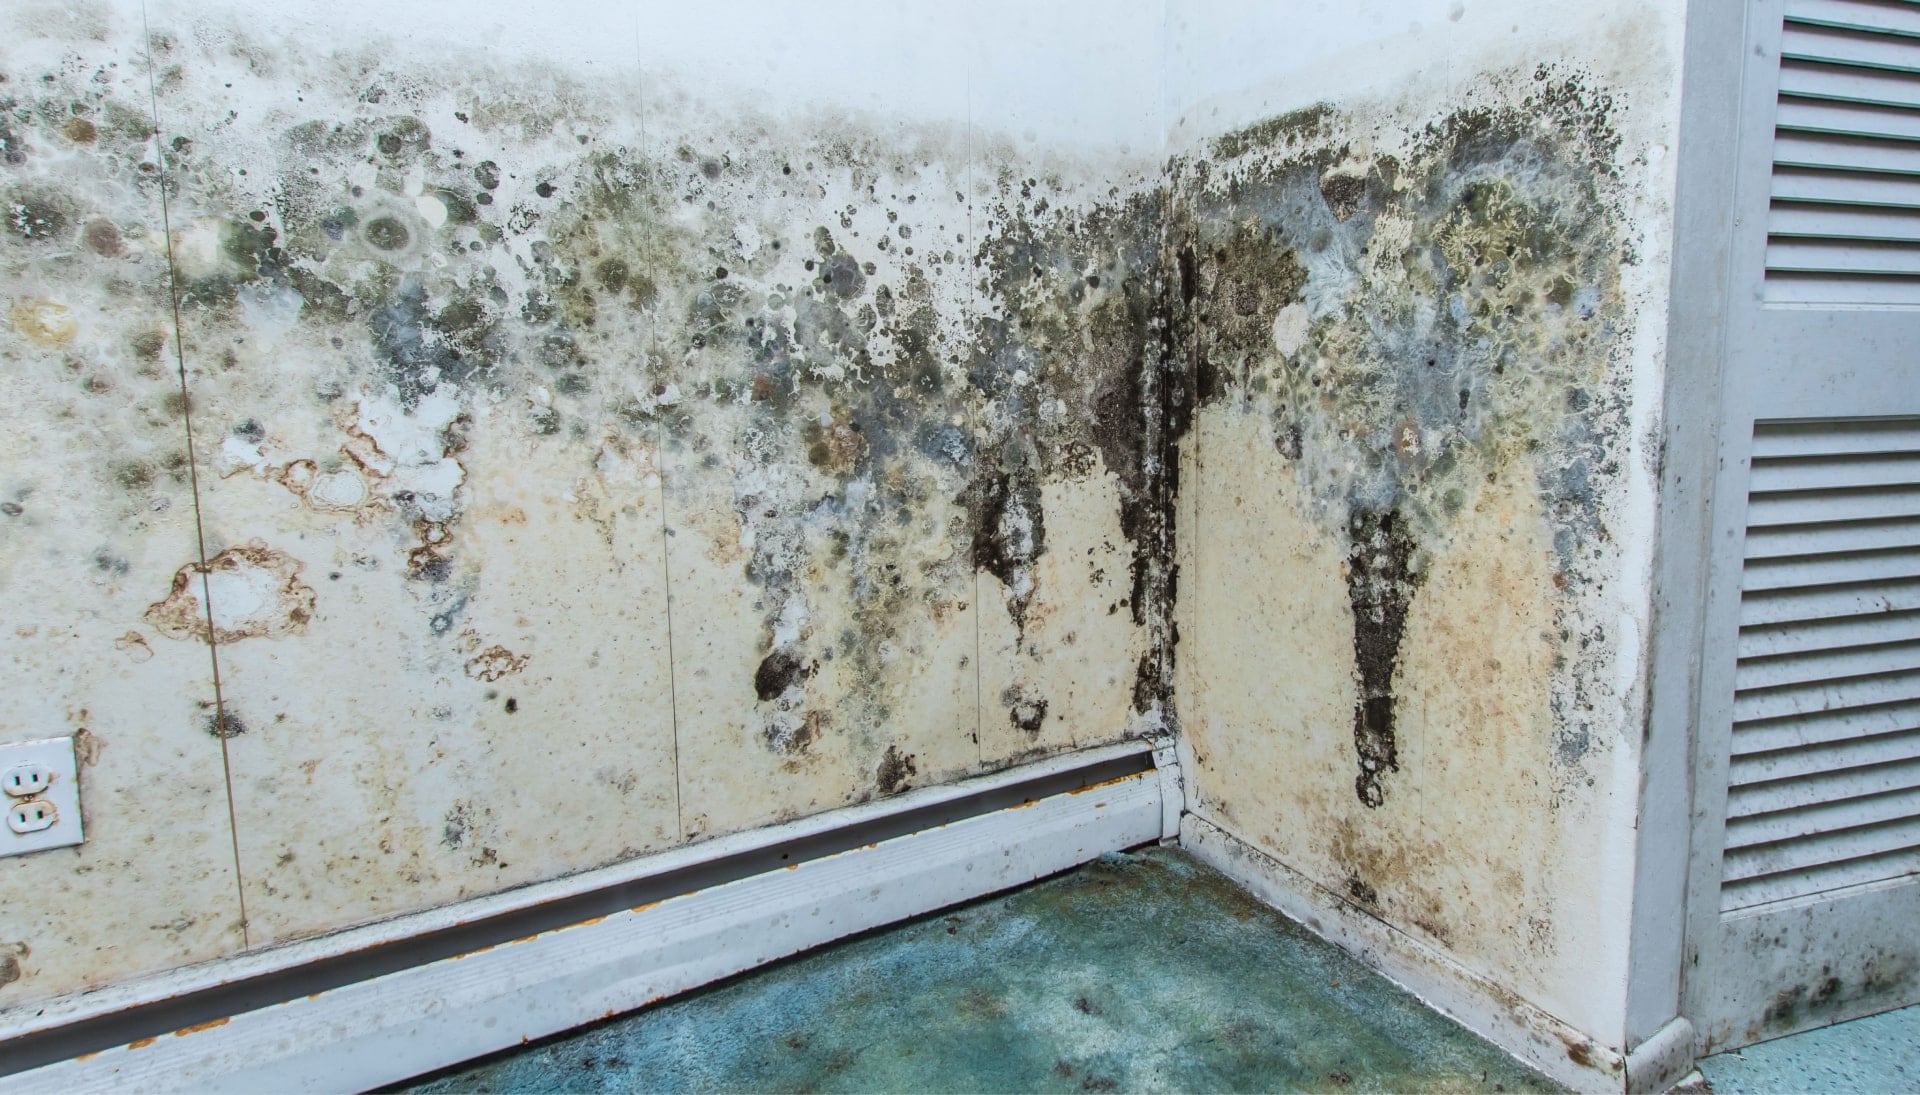 Professional mold removal, odor control, and water damage restoration service in Pensacola, Florida.